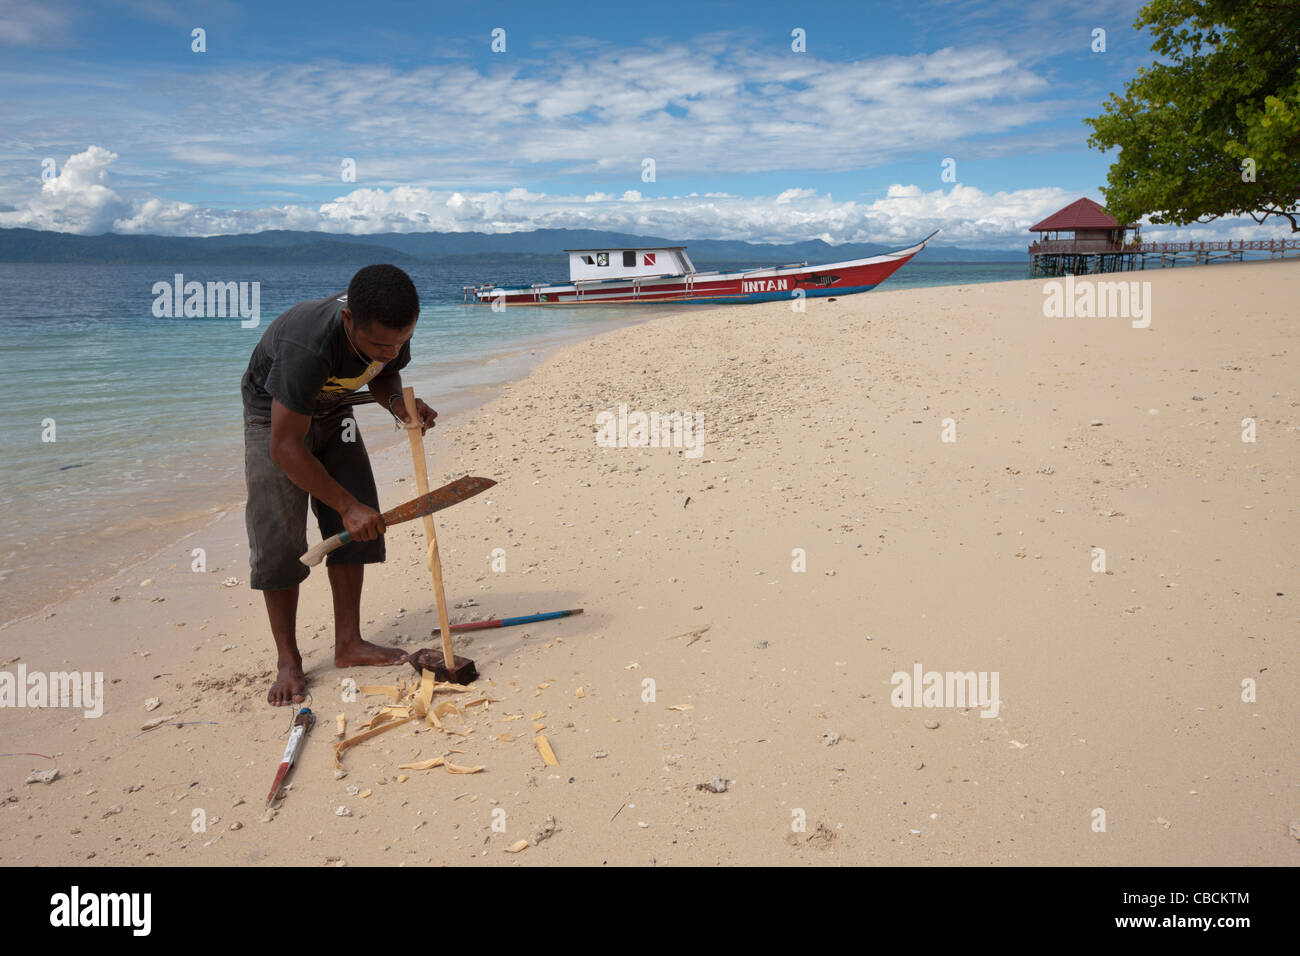 Native carving spare part of Outrigger Boat, Cenderawasih Bay, West Papua, Indonesia Stock Photo